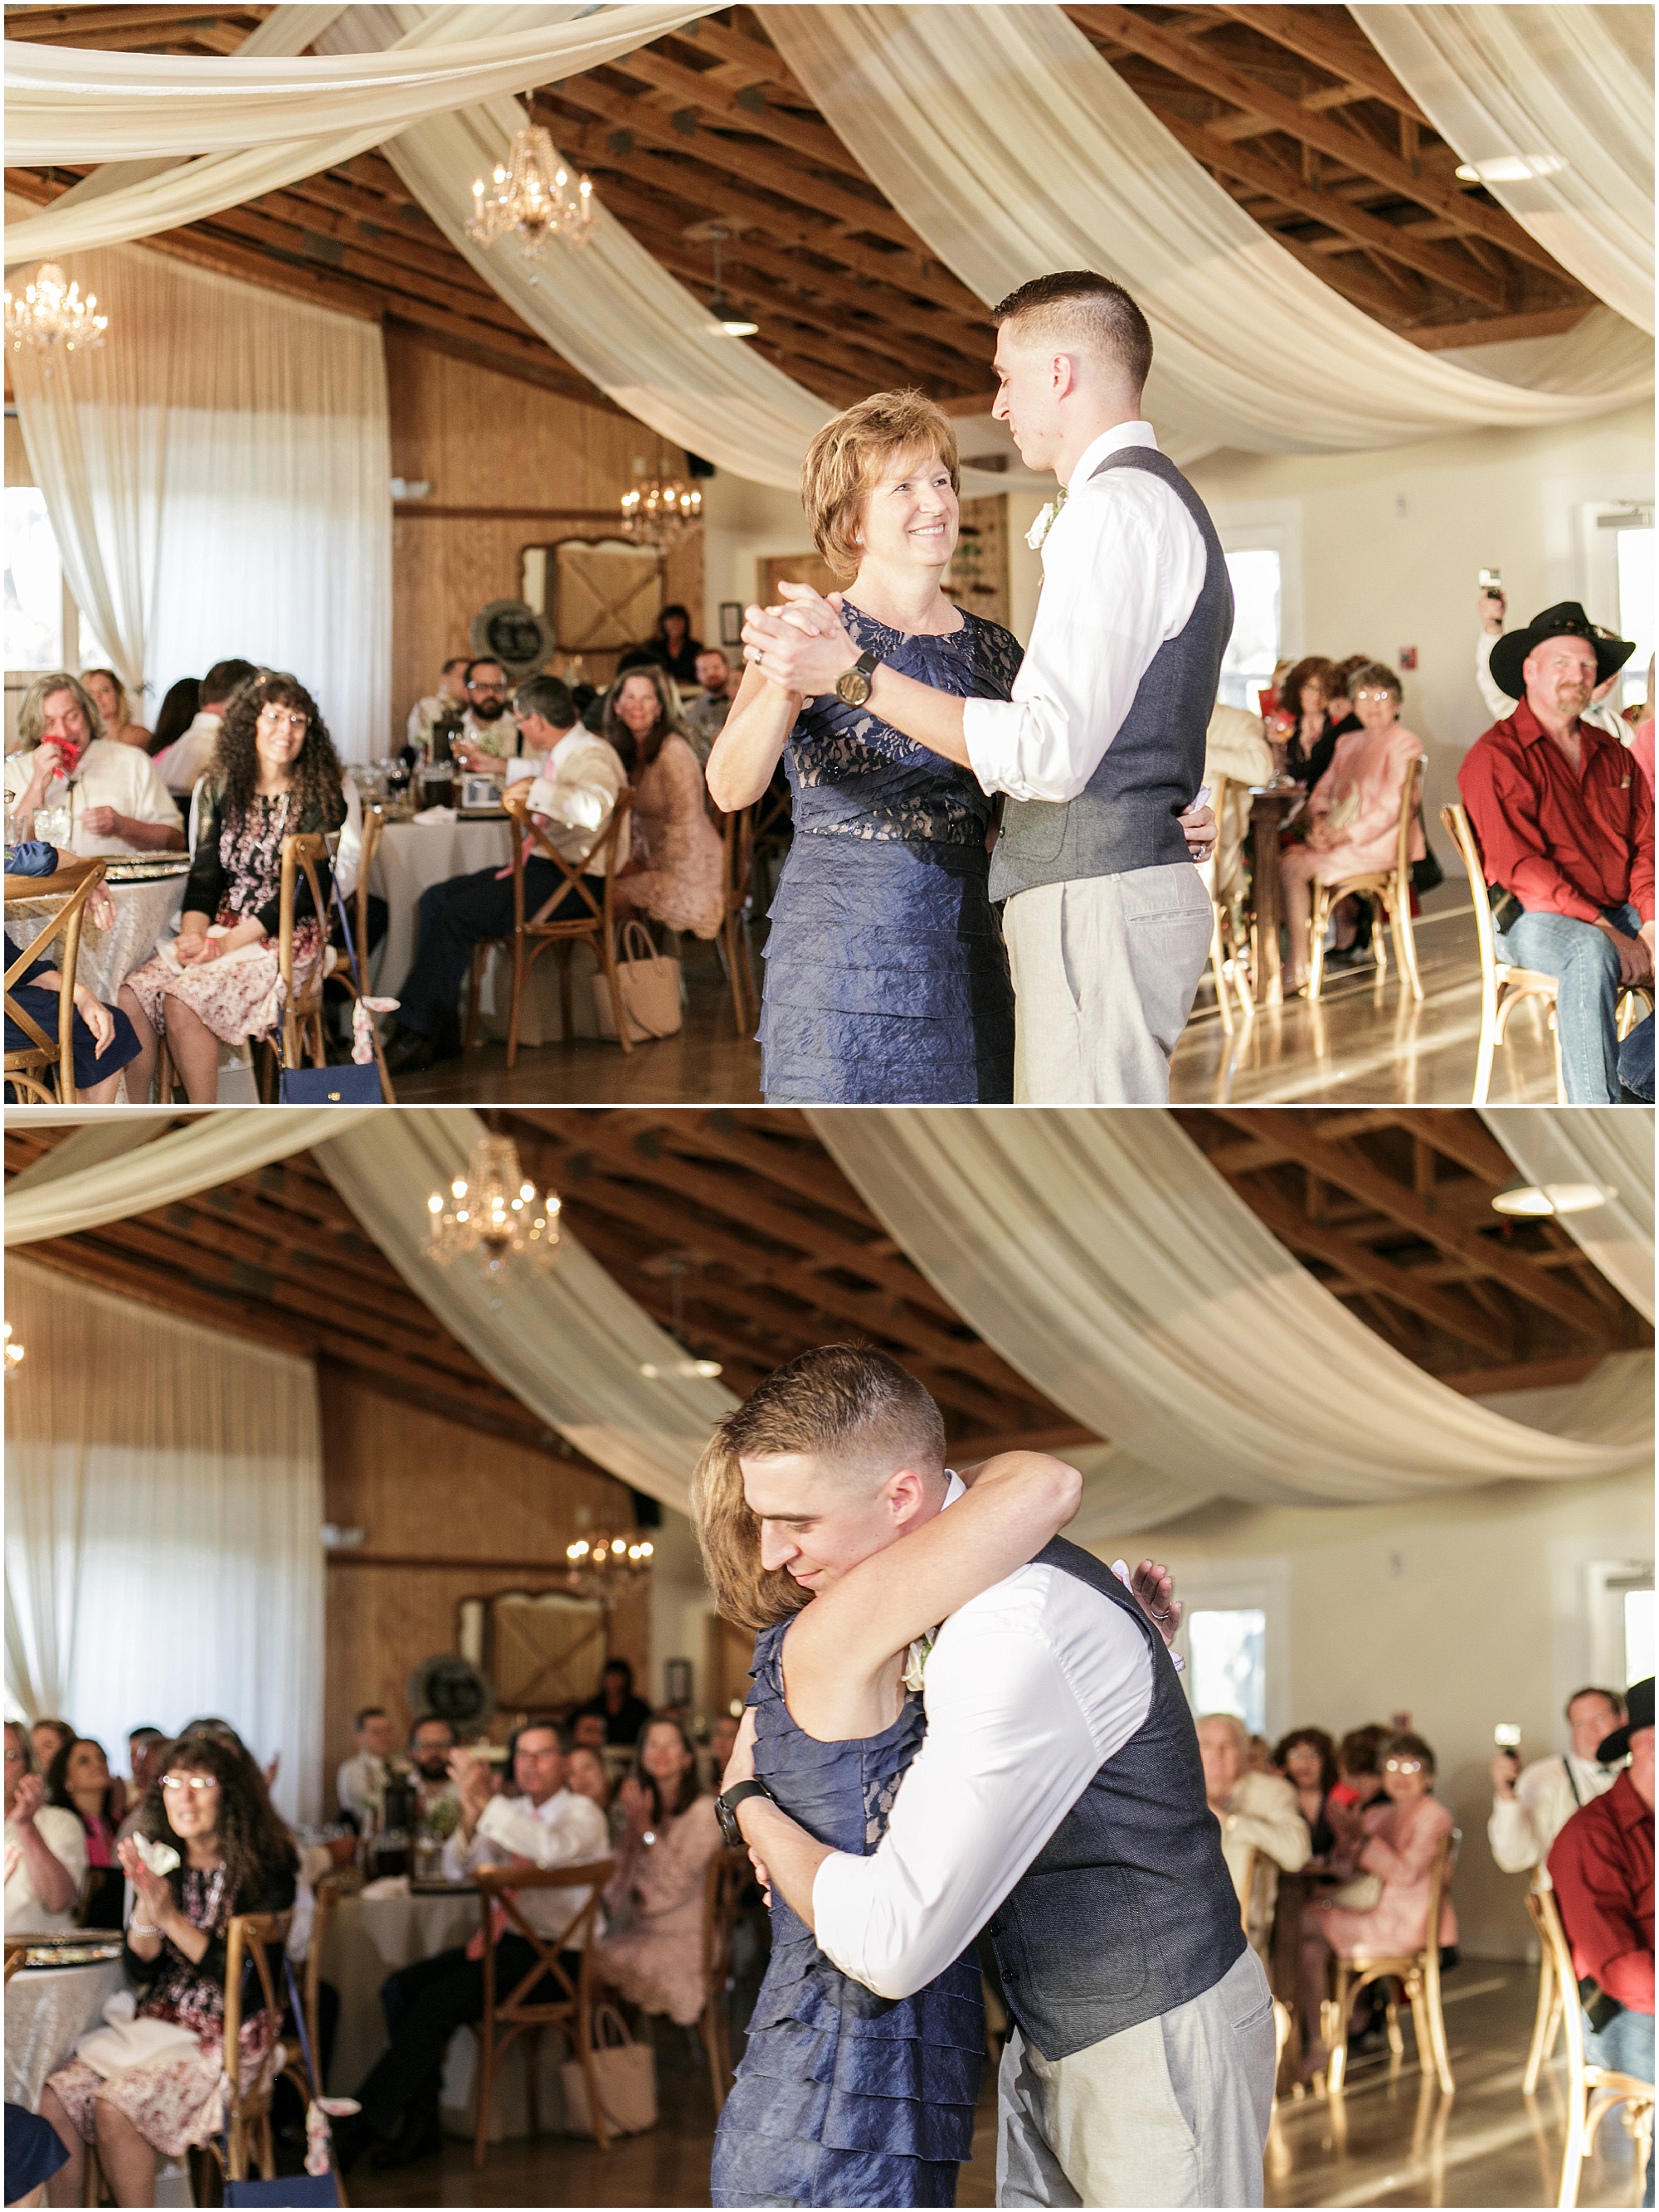 Groom dancing with his mother at his wedding.